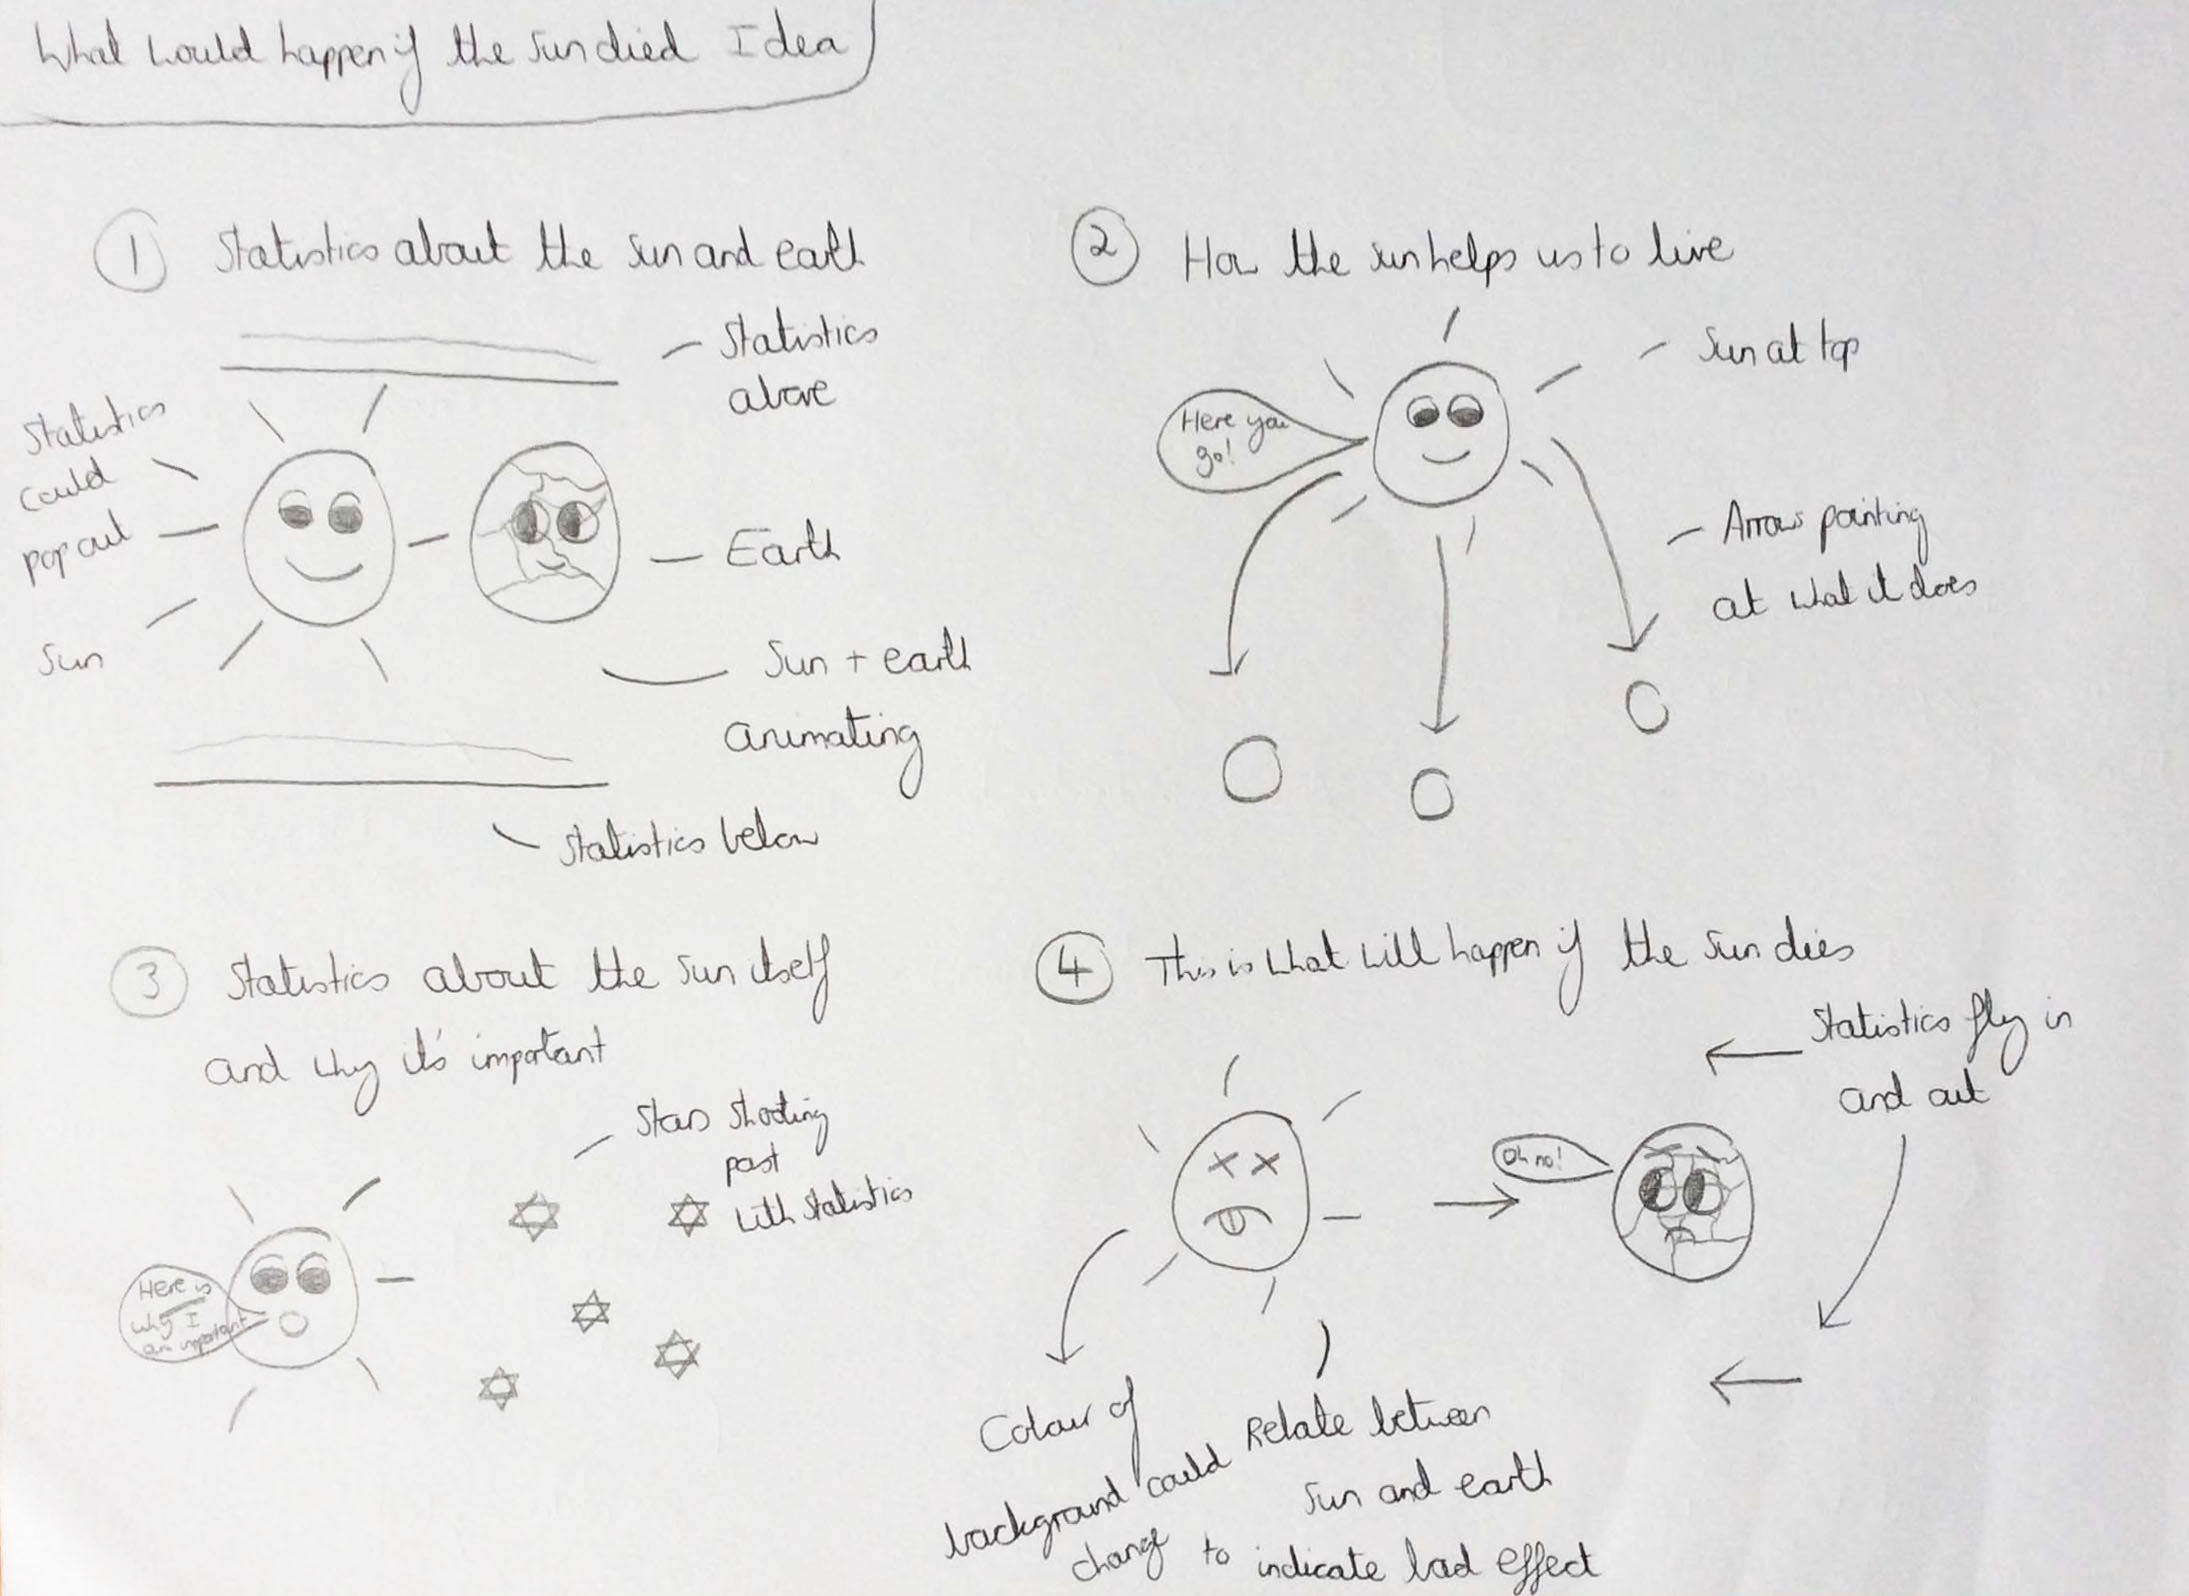 Sketches of the 'What Would Happen if the Sun Died?' Idea